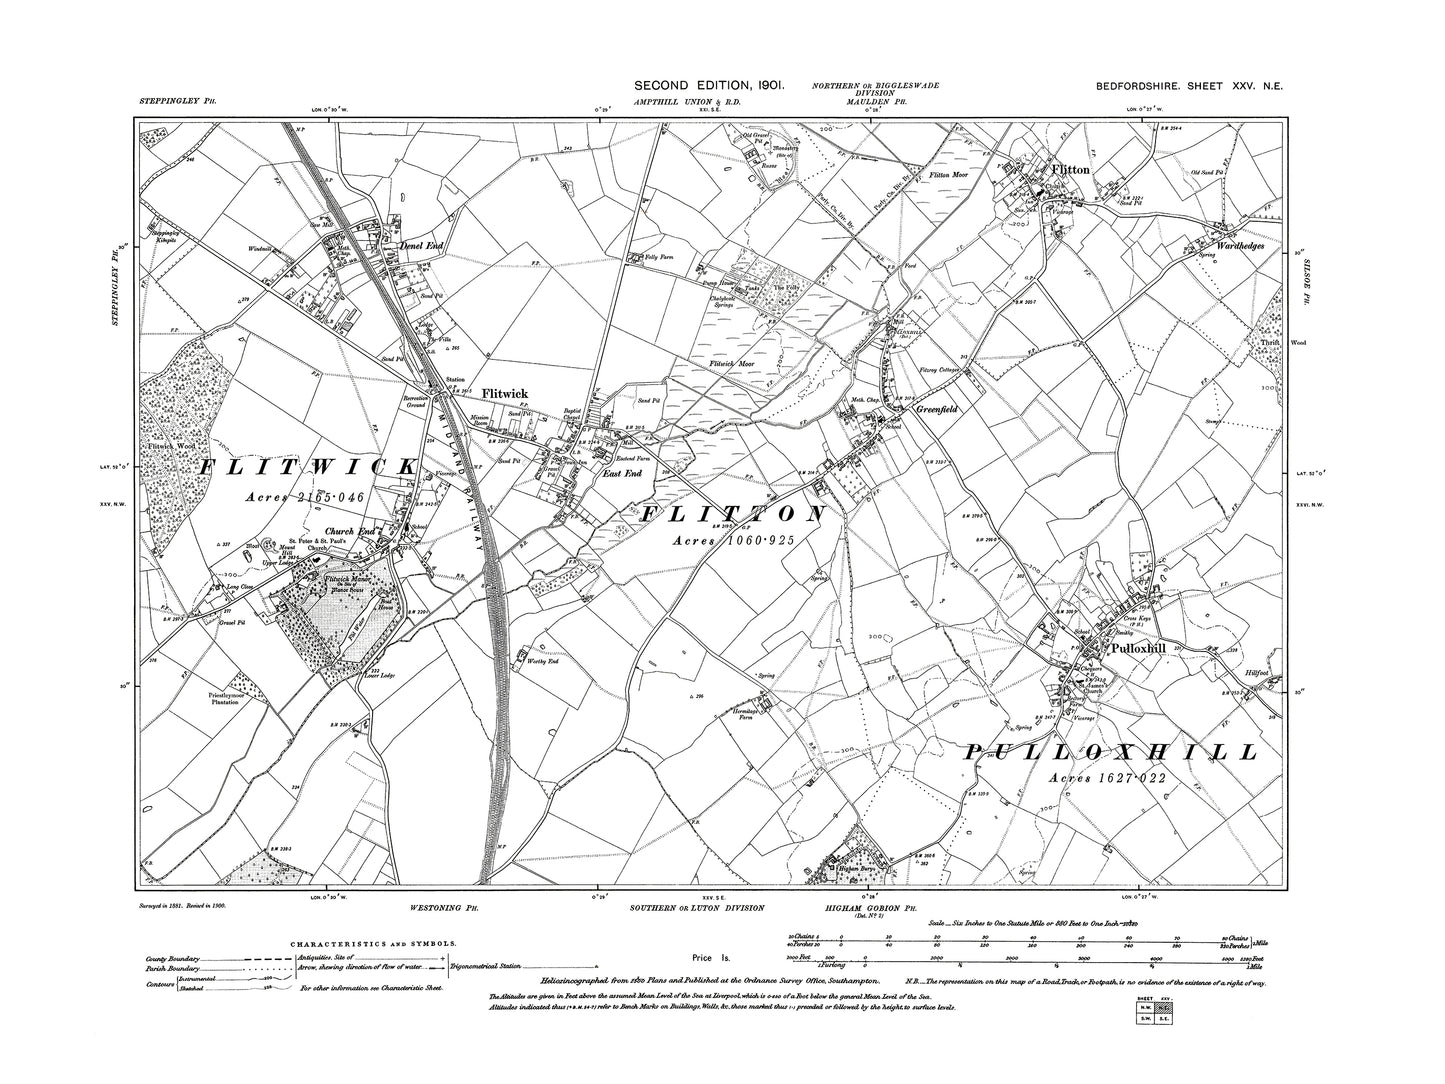 A 1901 map showing Flitwick, Flitton, Greenfield and Pulloxhill in Bedfordshire - A Digital Download 0f OS 1:10560 scale map, Beds 25NE